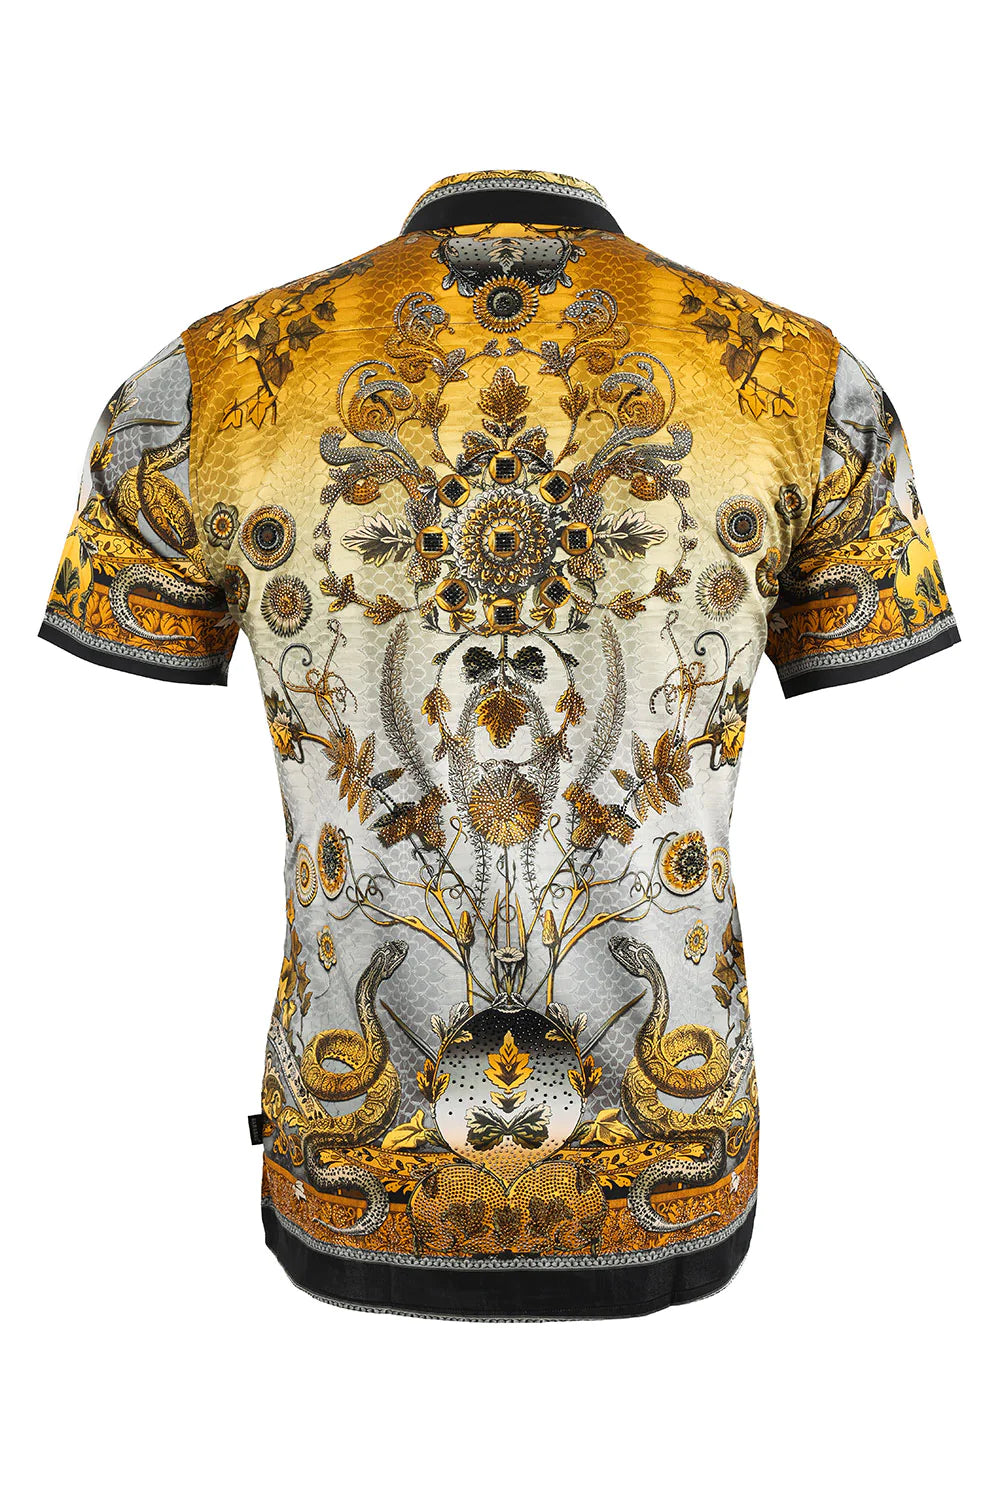 Barbas Exquisite Peacock Feather Shirt